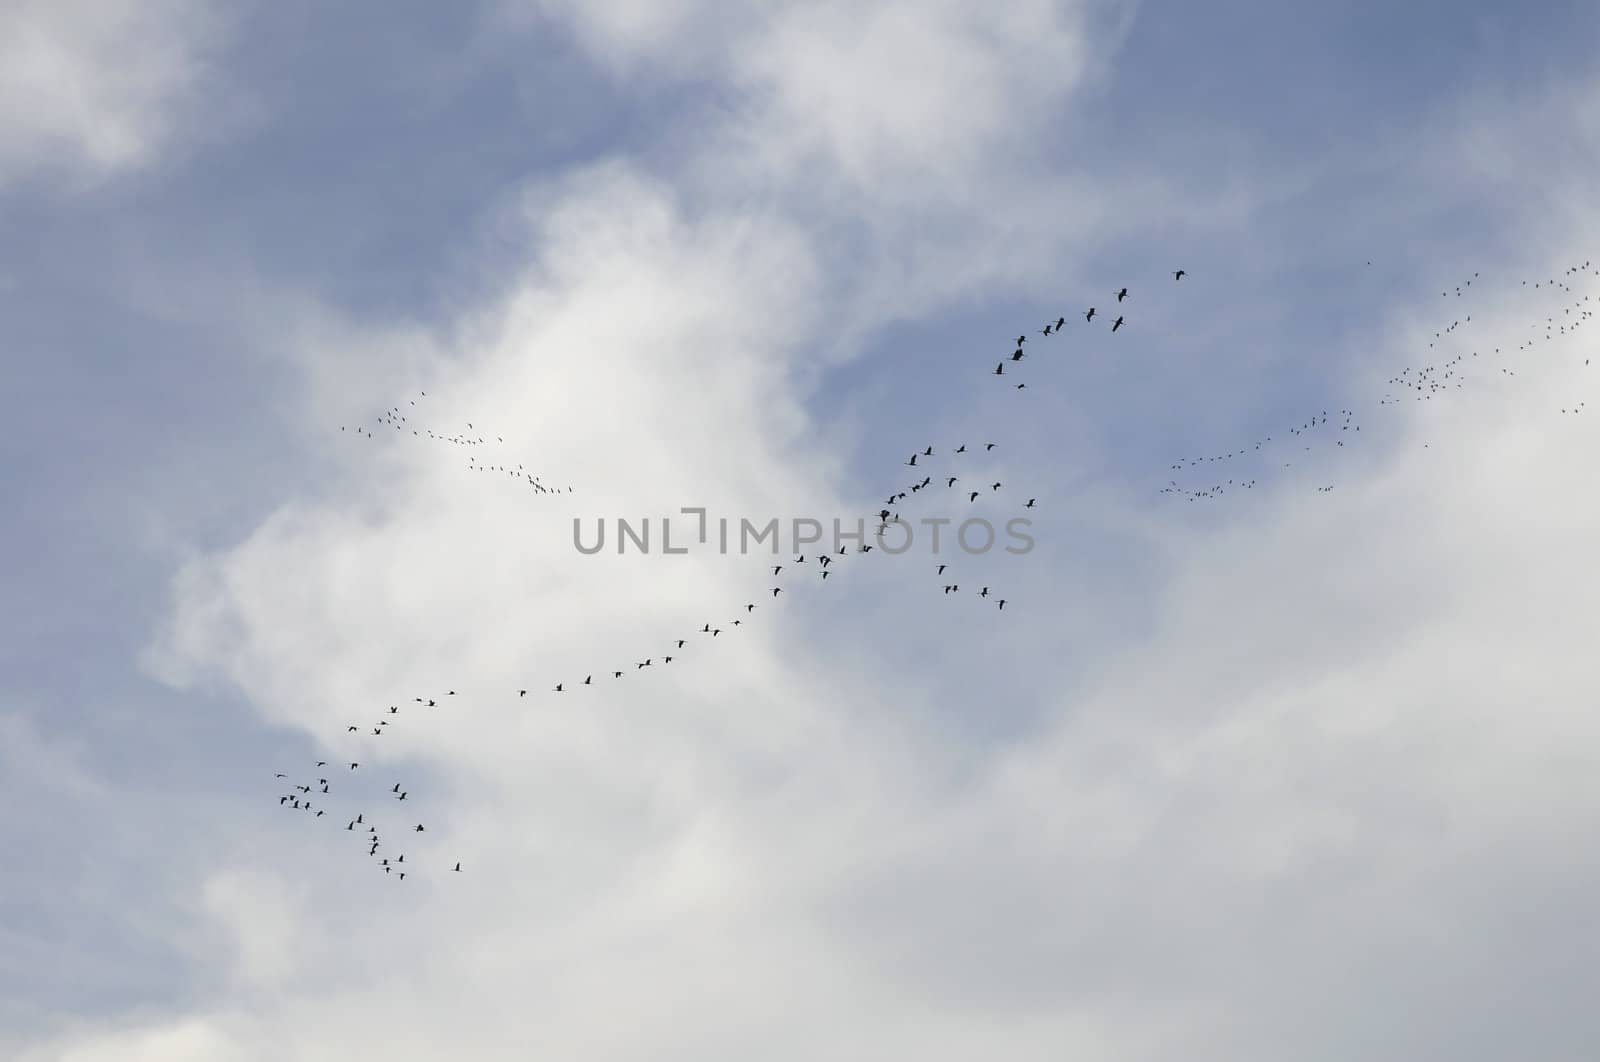 Common cranes in the sky with some clouds during their fall migration